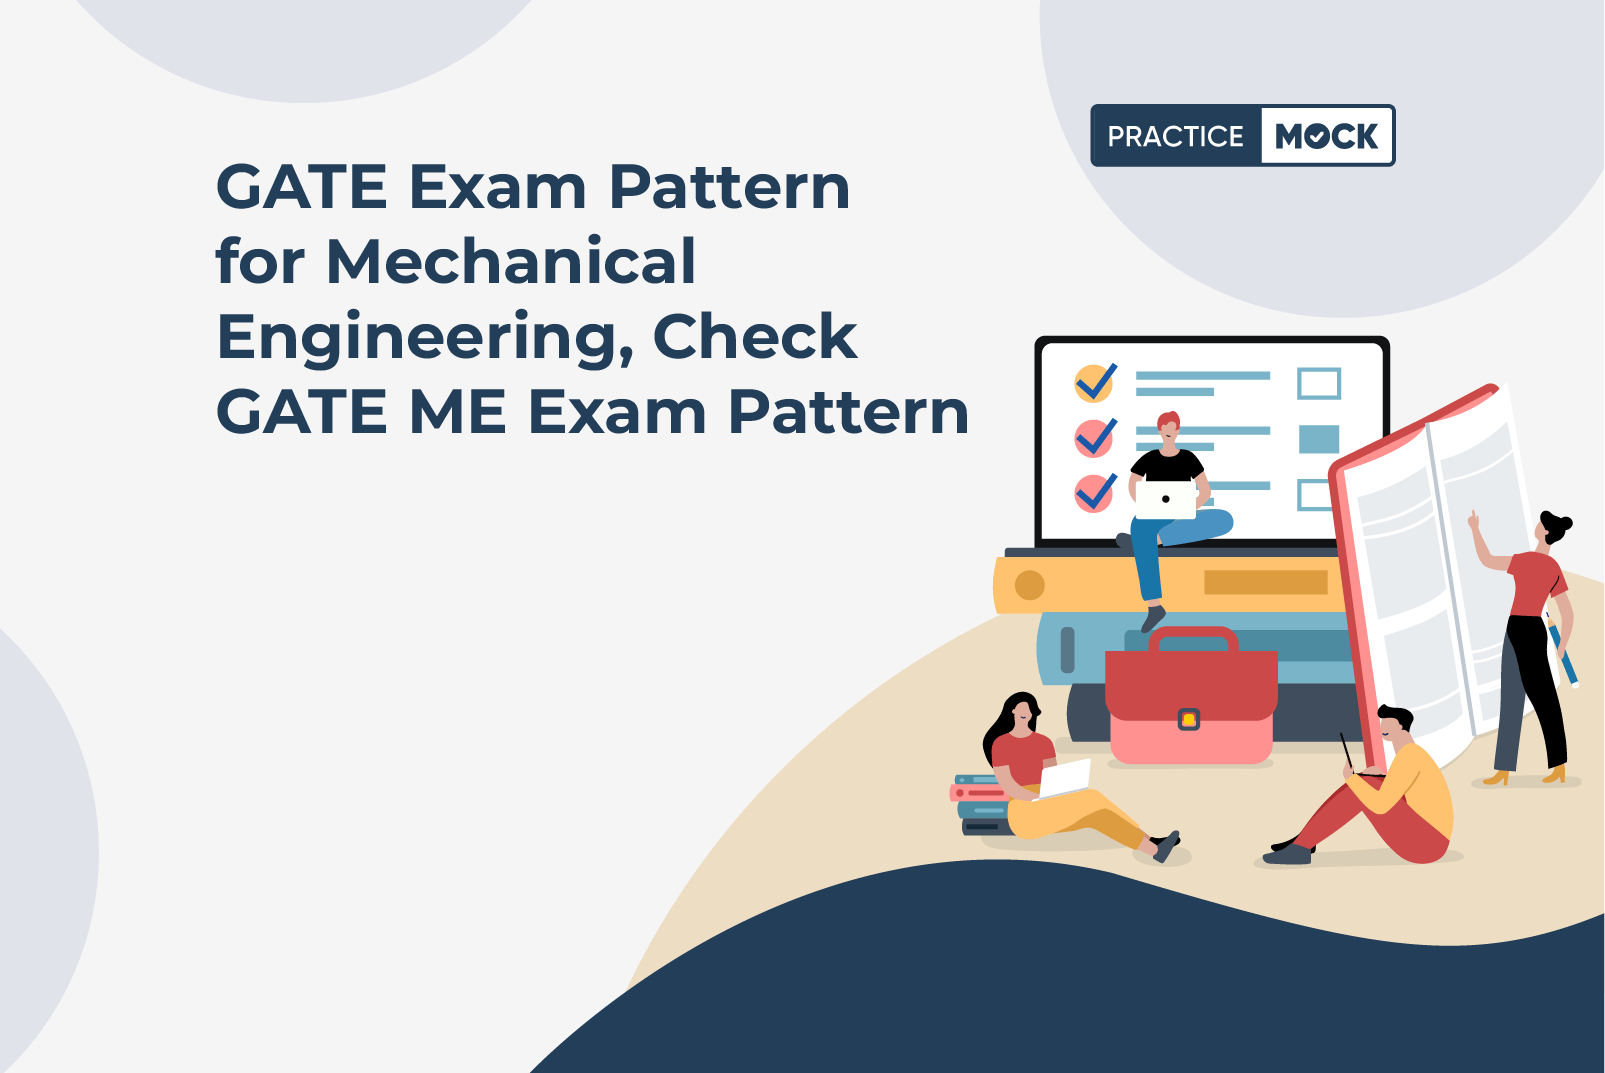 GATE Exam Pattern for Mechanical Engineering, Check GATE ME Exam Pattern